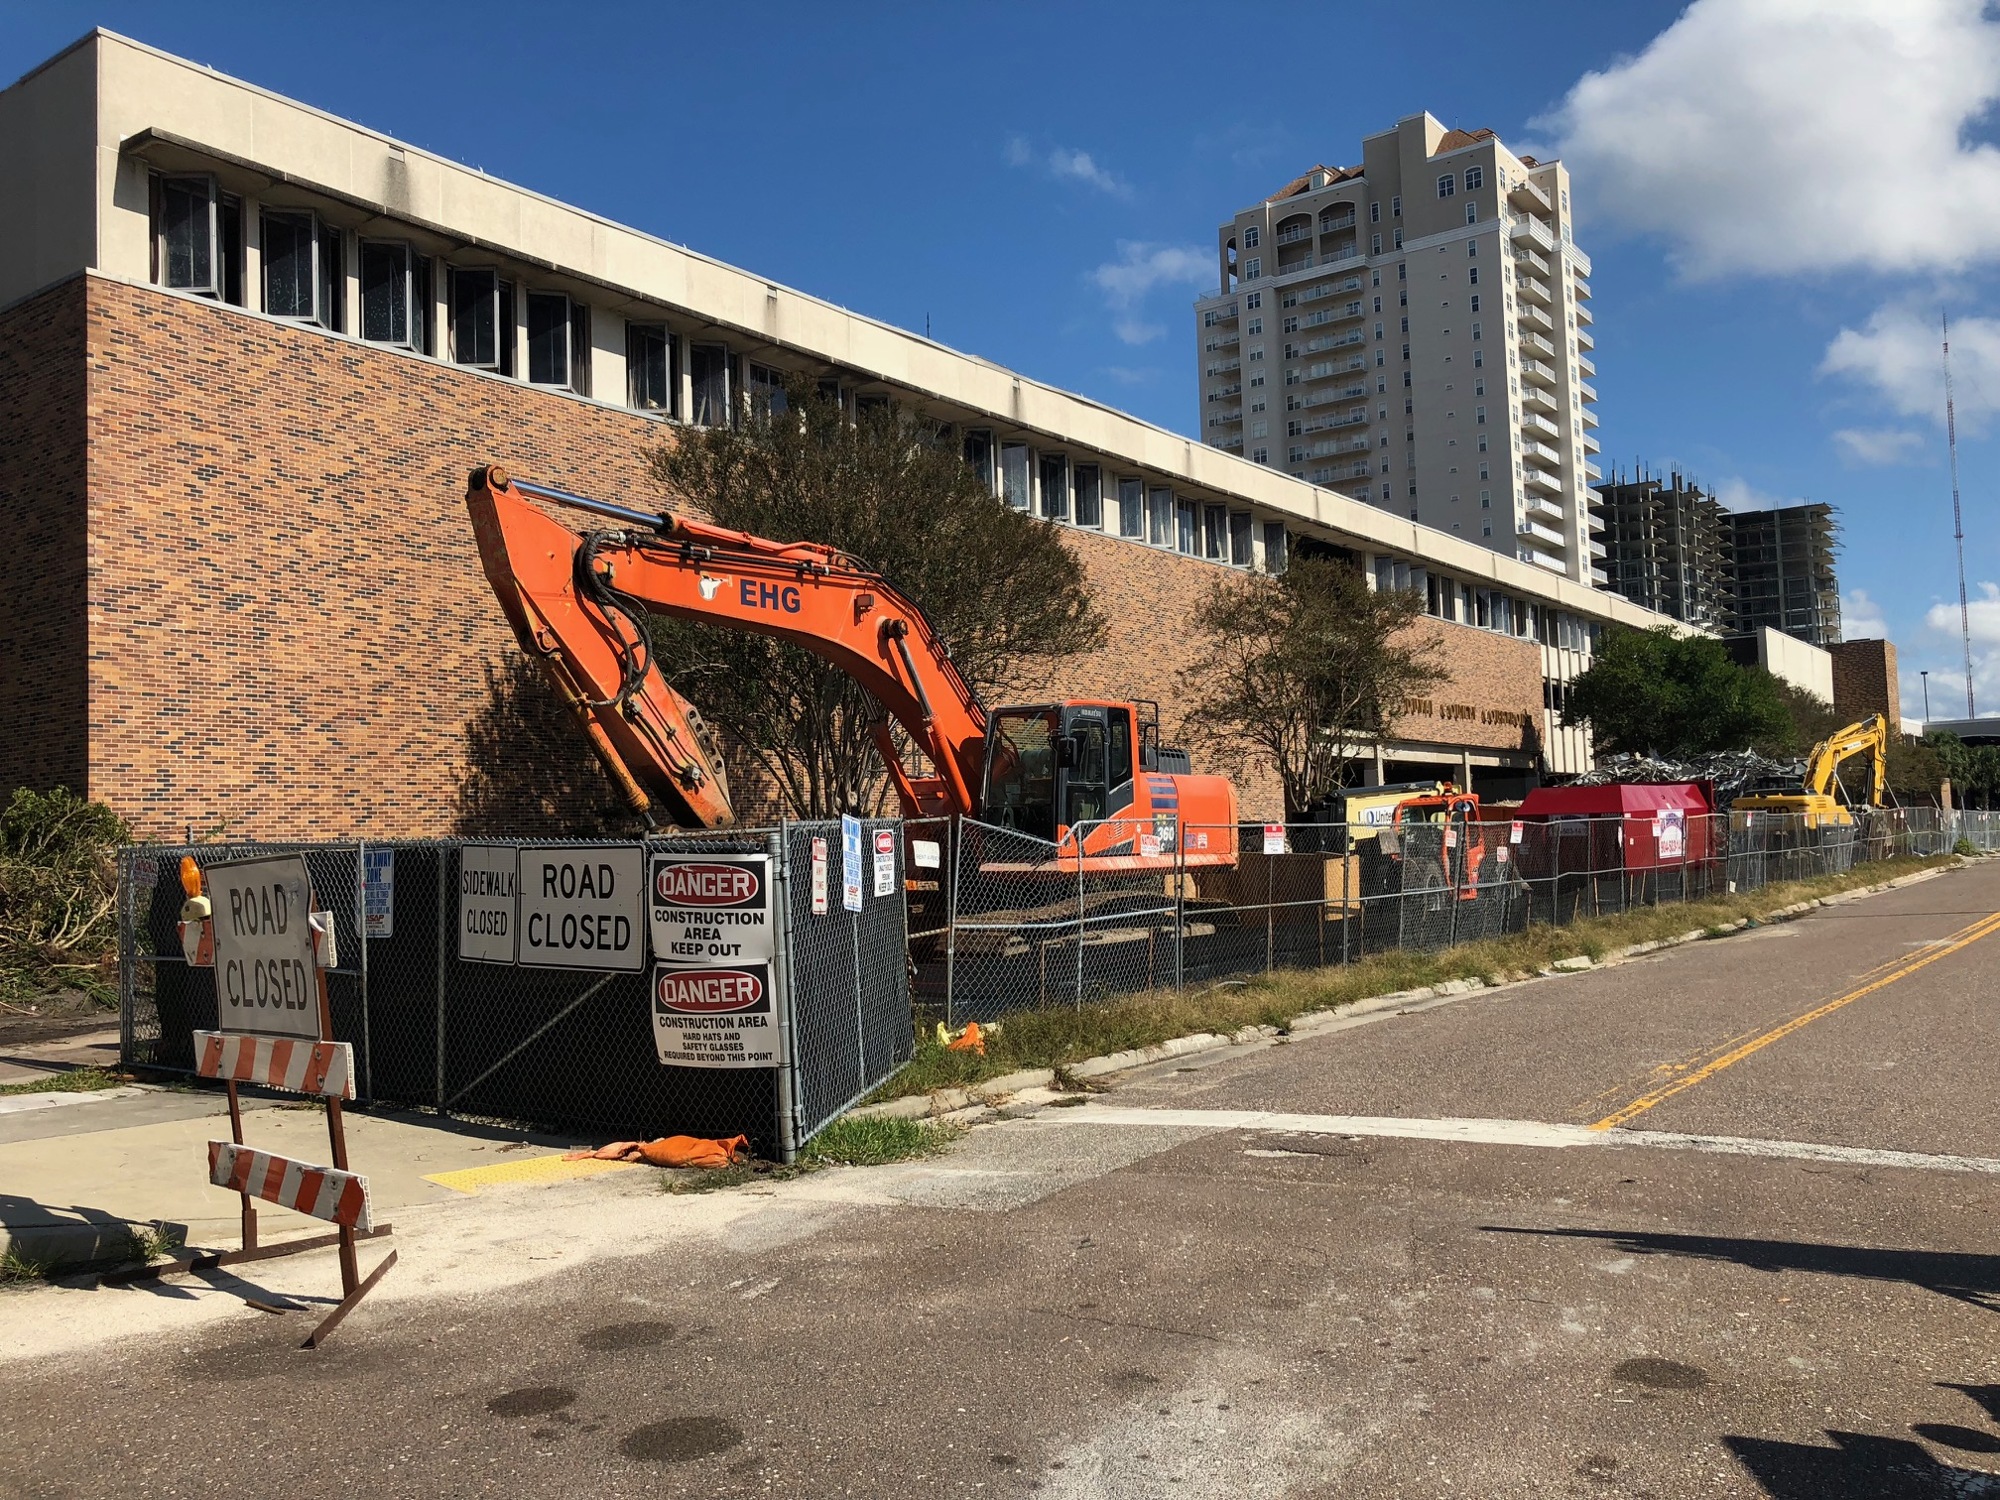 Demolition of the former Duval County Courthouse at 330 E. Bay St. is expected to be completed in April.